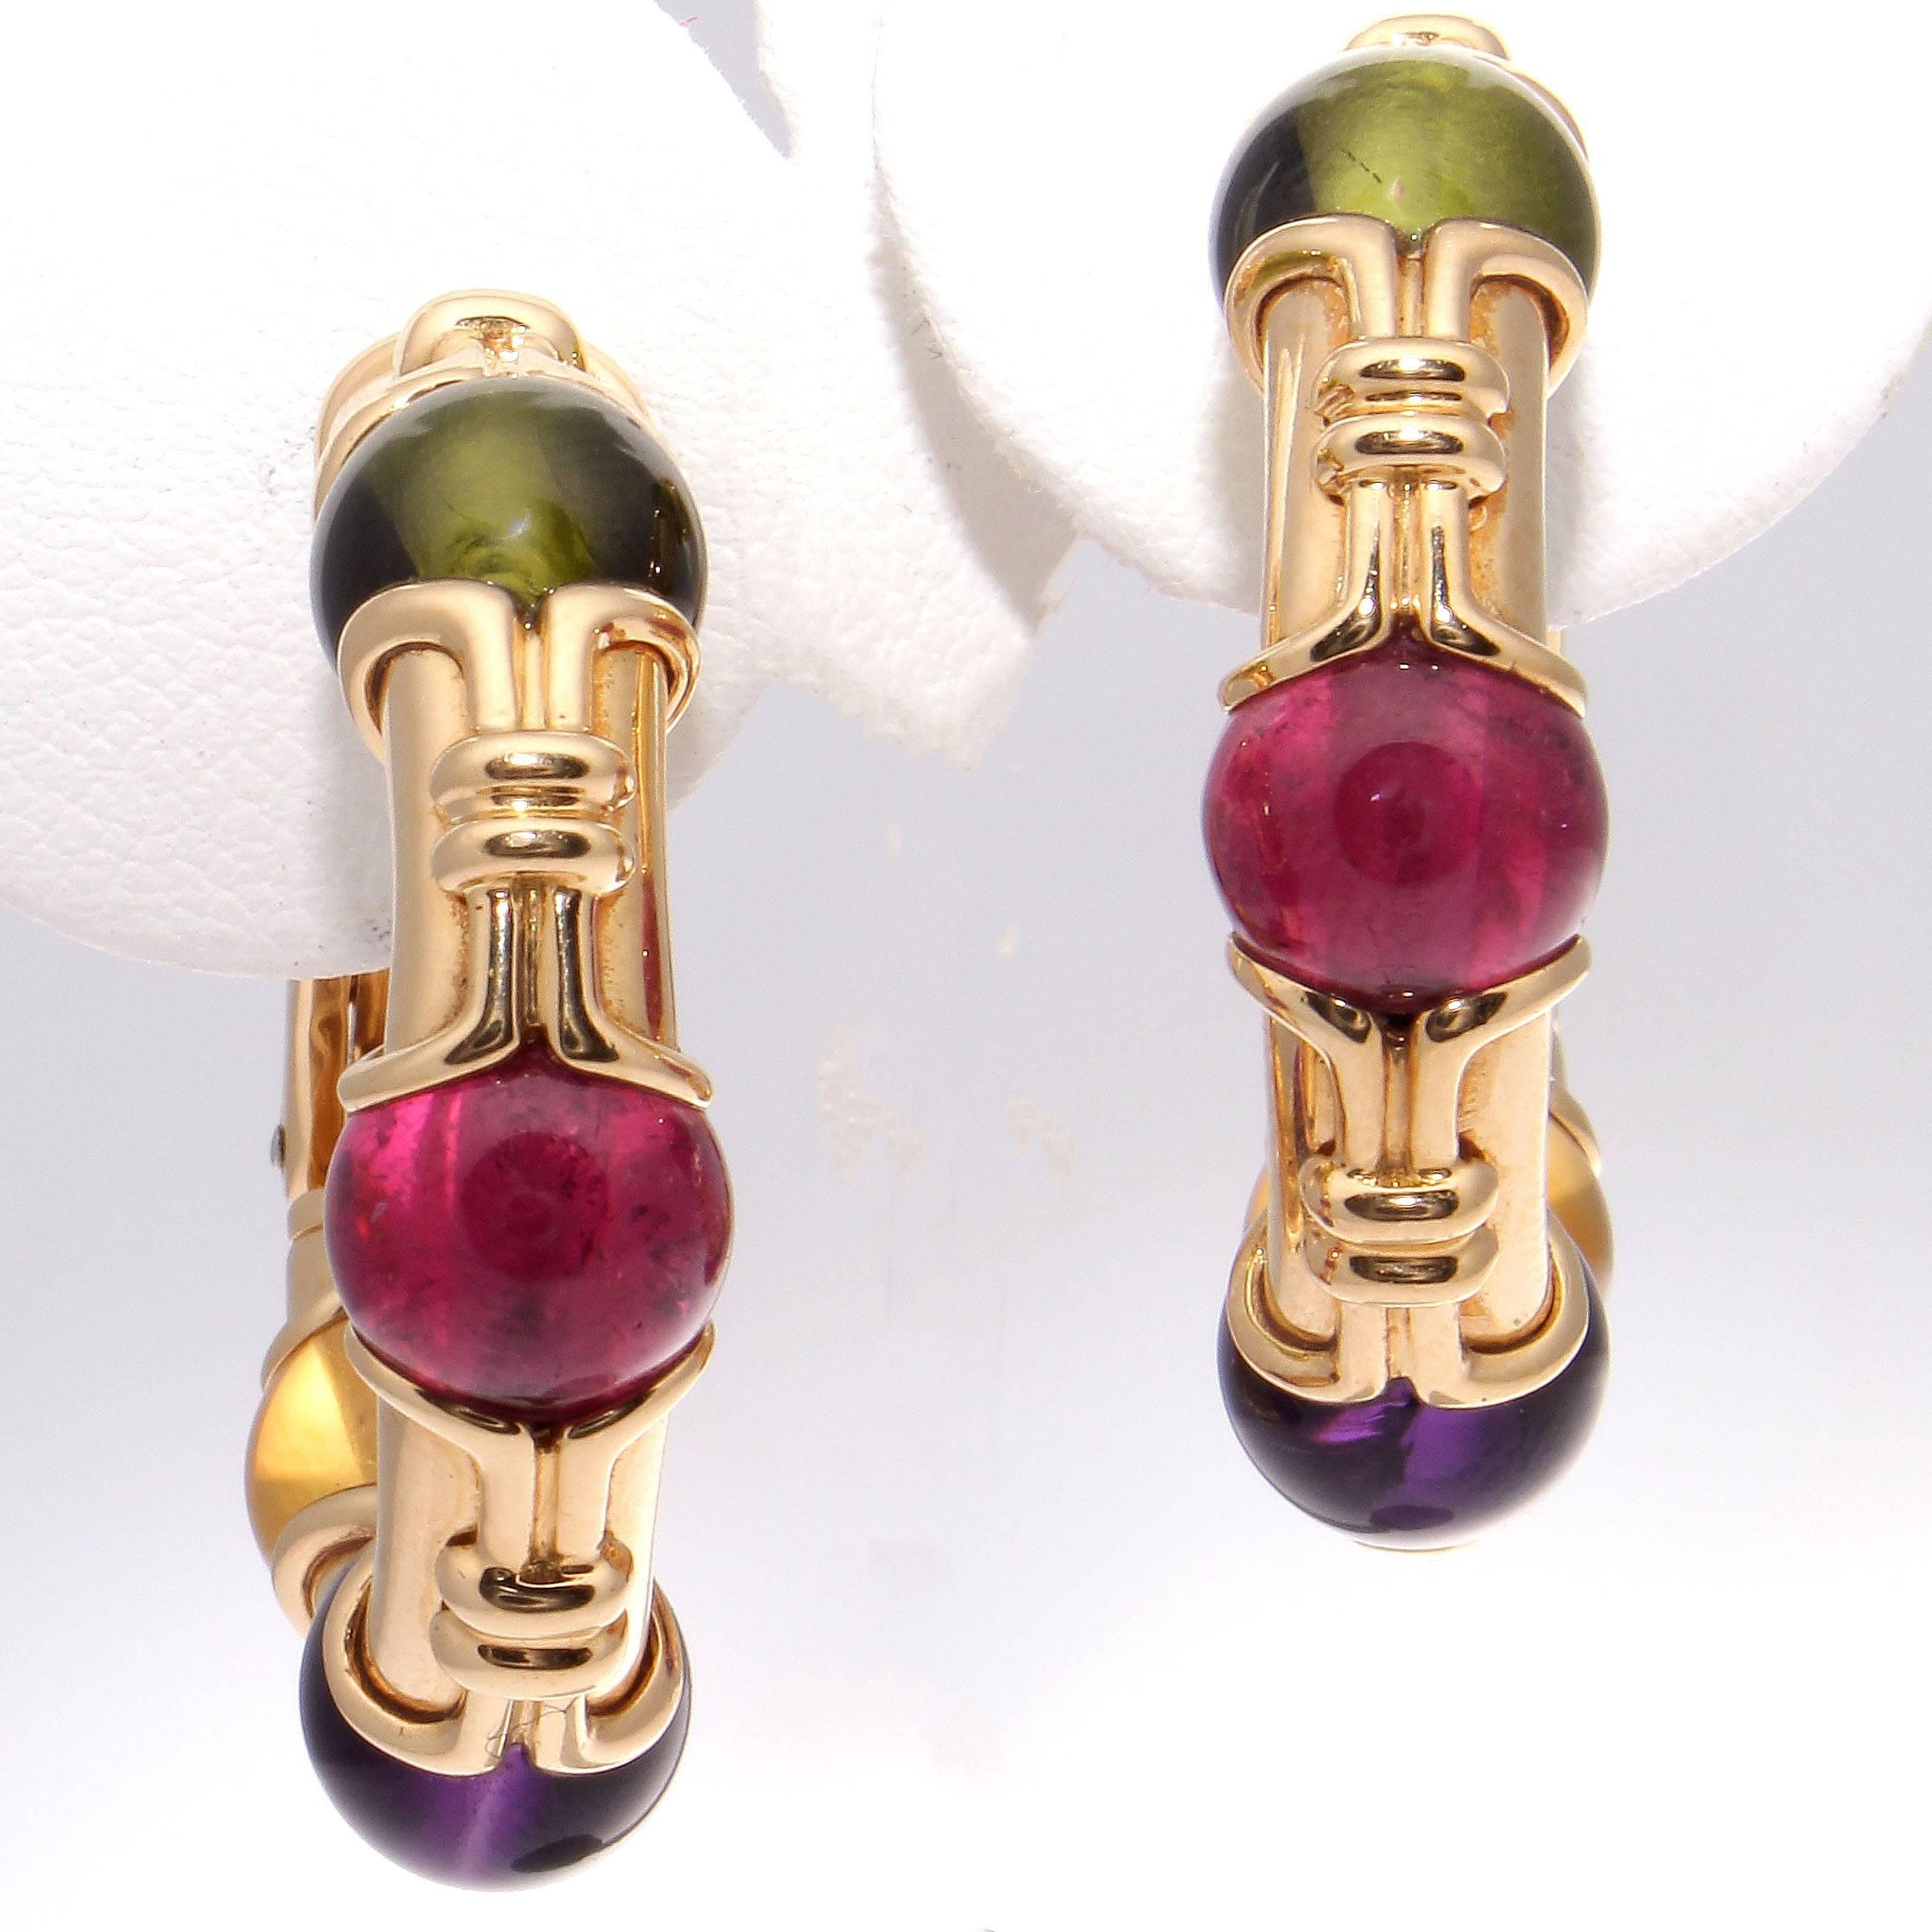 Andy Warhol in an interview said Bulgari jewelry is the 1980's. This is when their distinctive bold colorful designs became their iconic look. 

Featuring cabochon cut lively purple amethyst, golden citrine, reddish-pink tourmaline and green